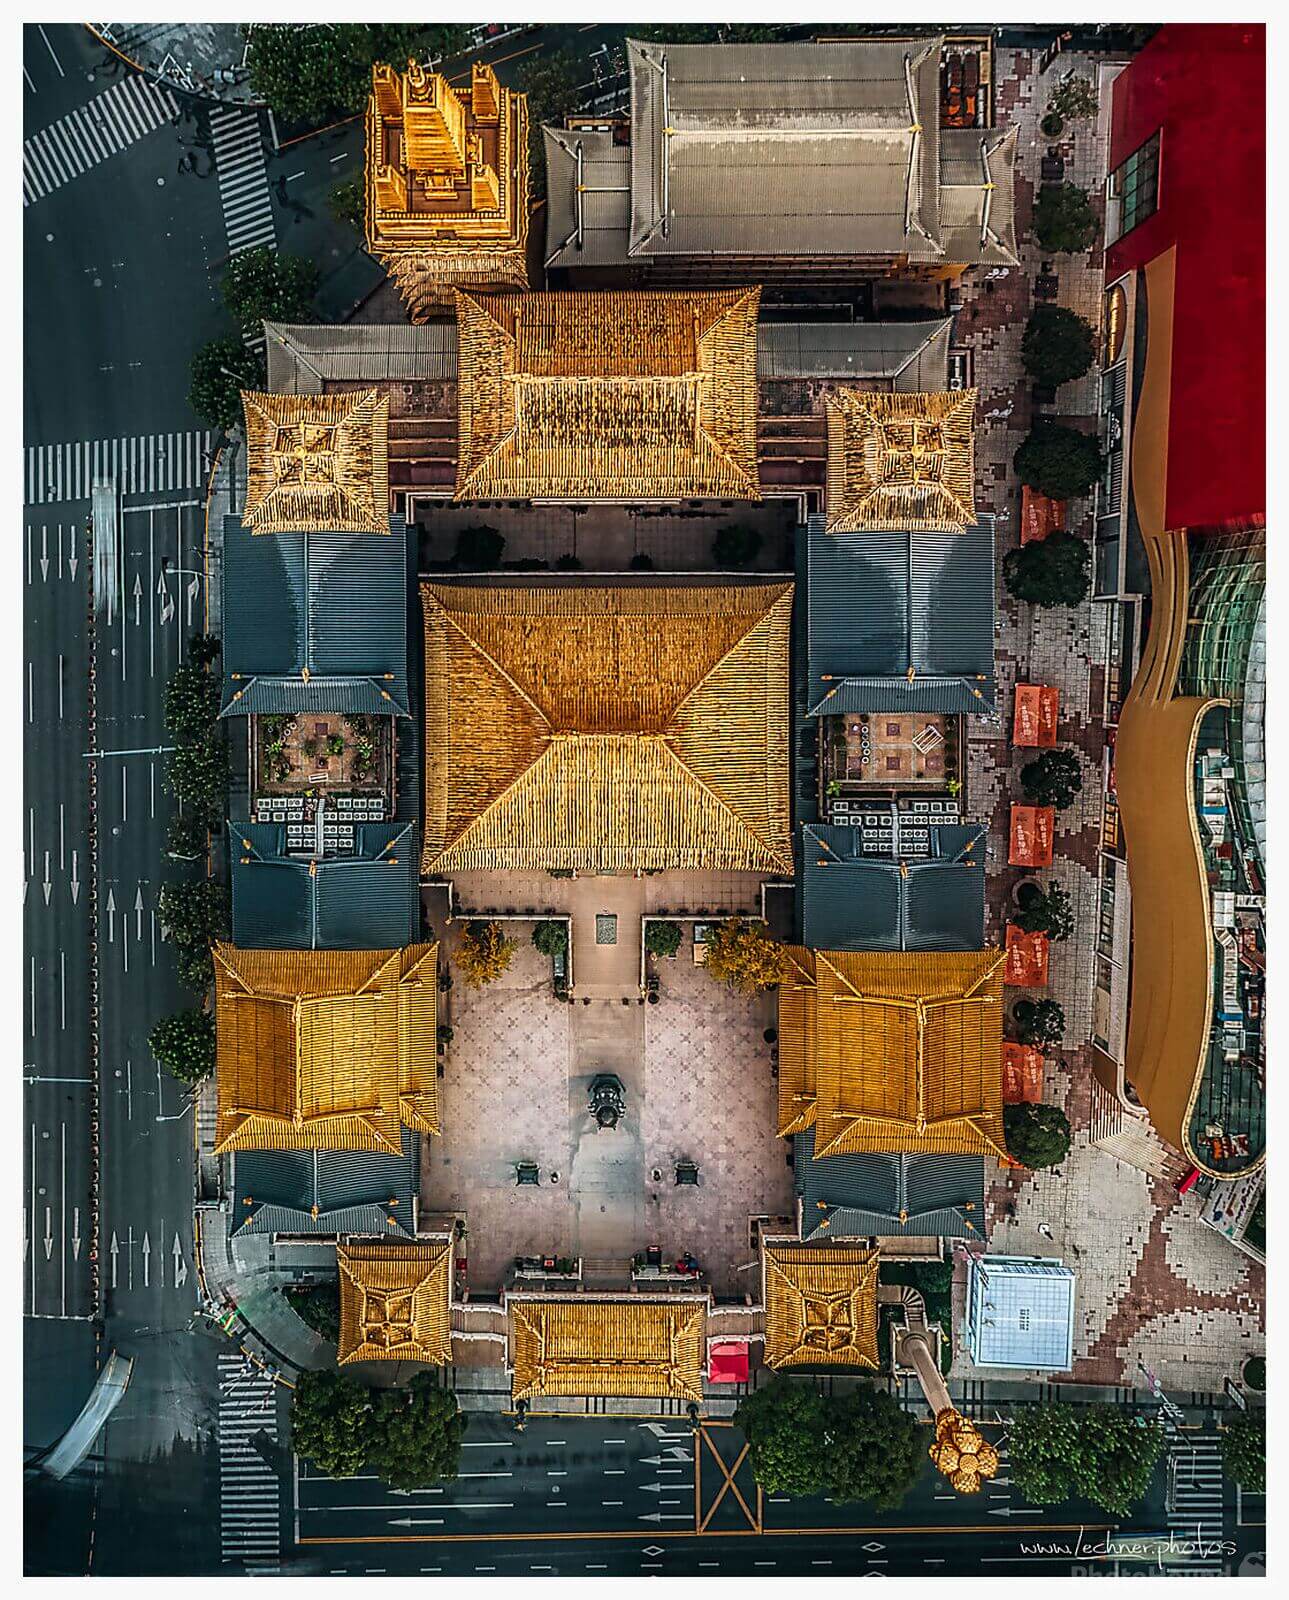 Image of Jing\'An Temple by Florian Lechner